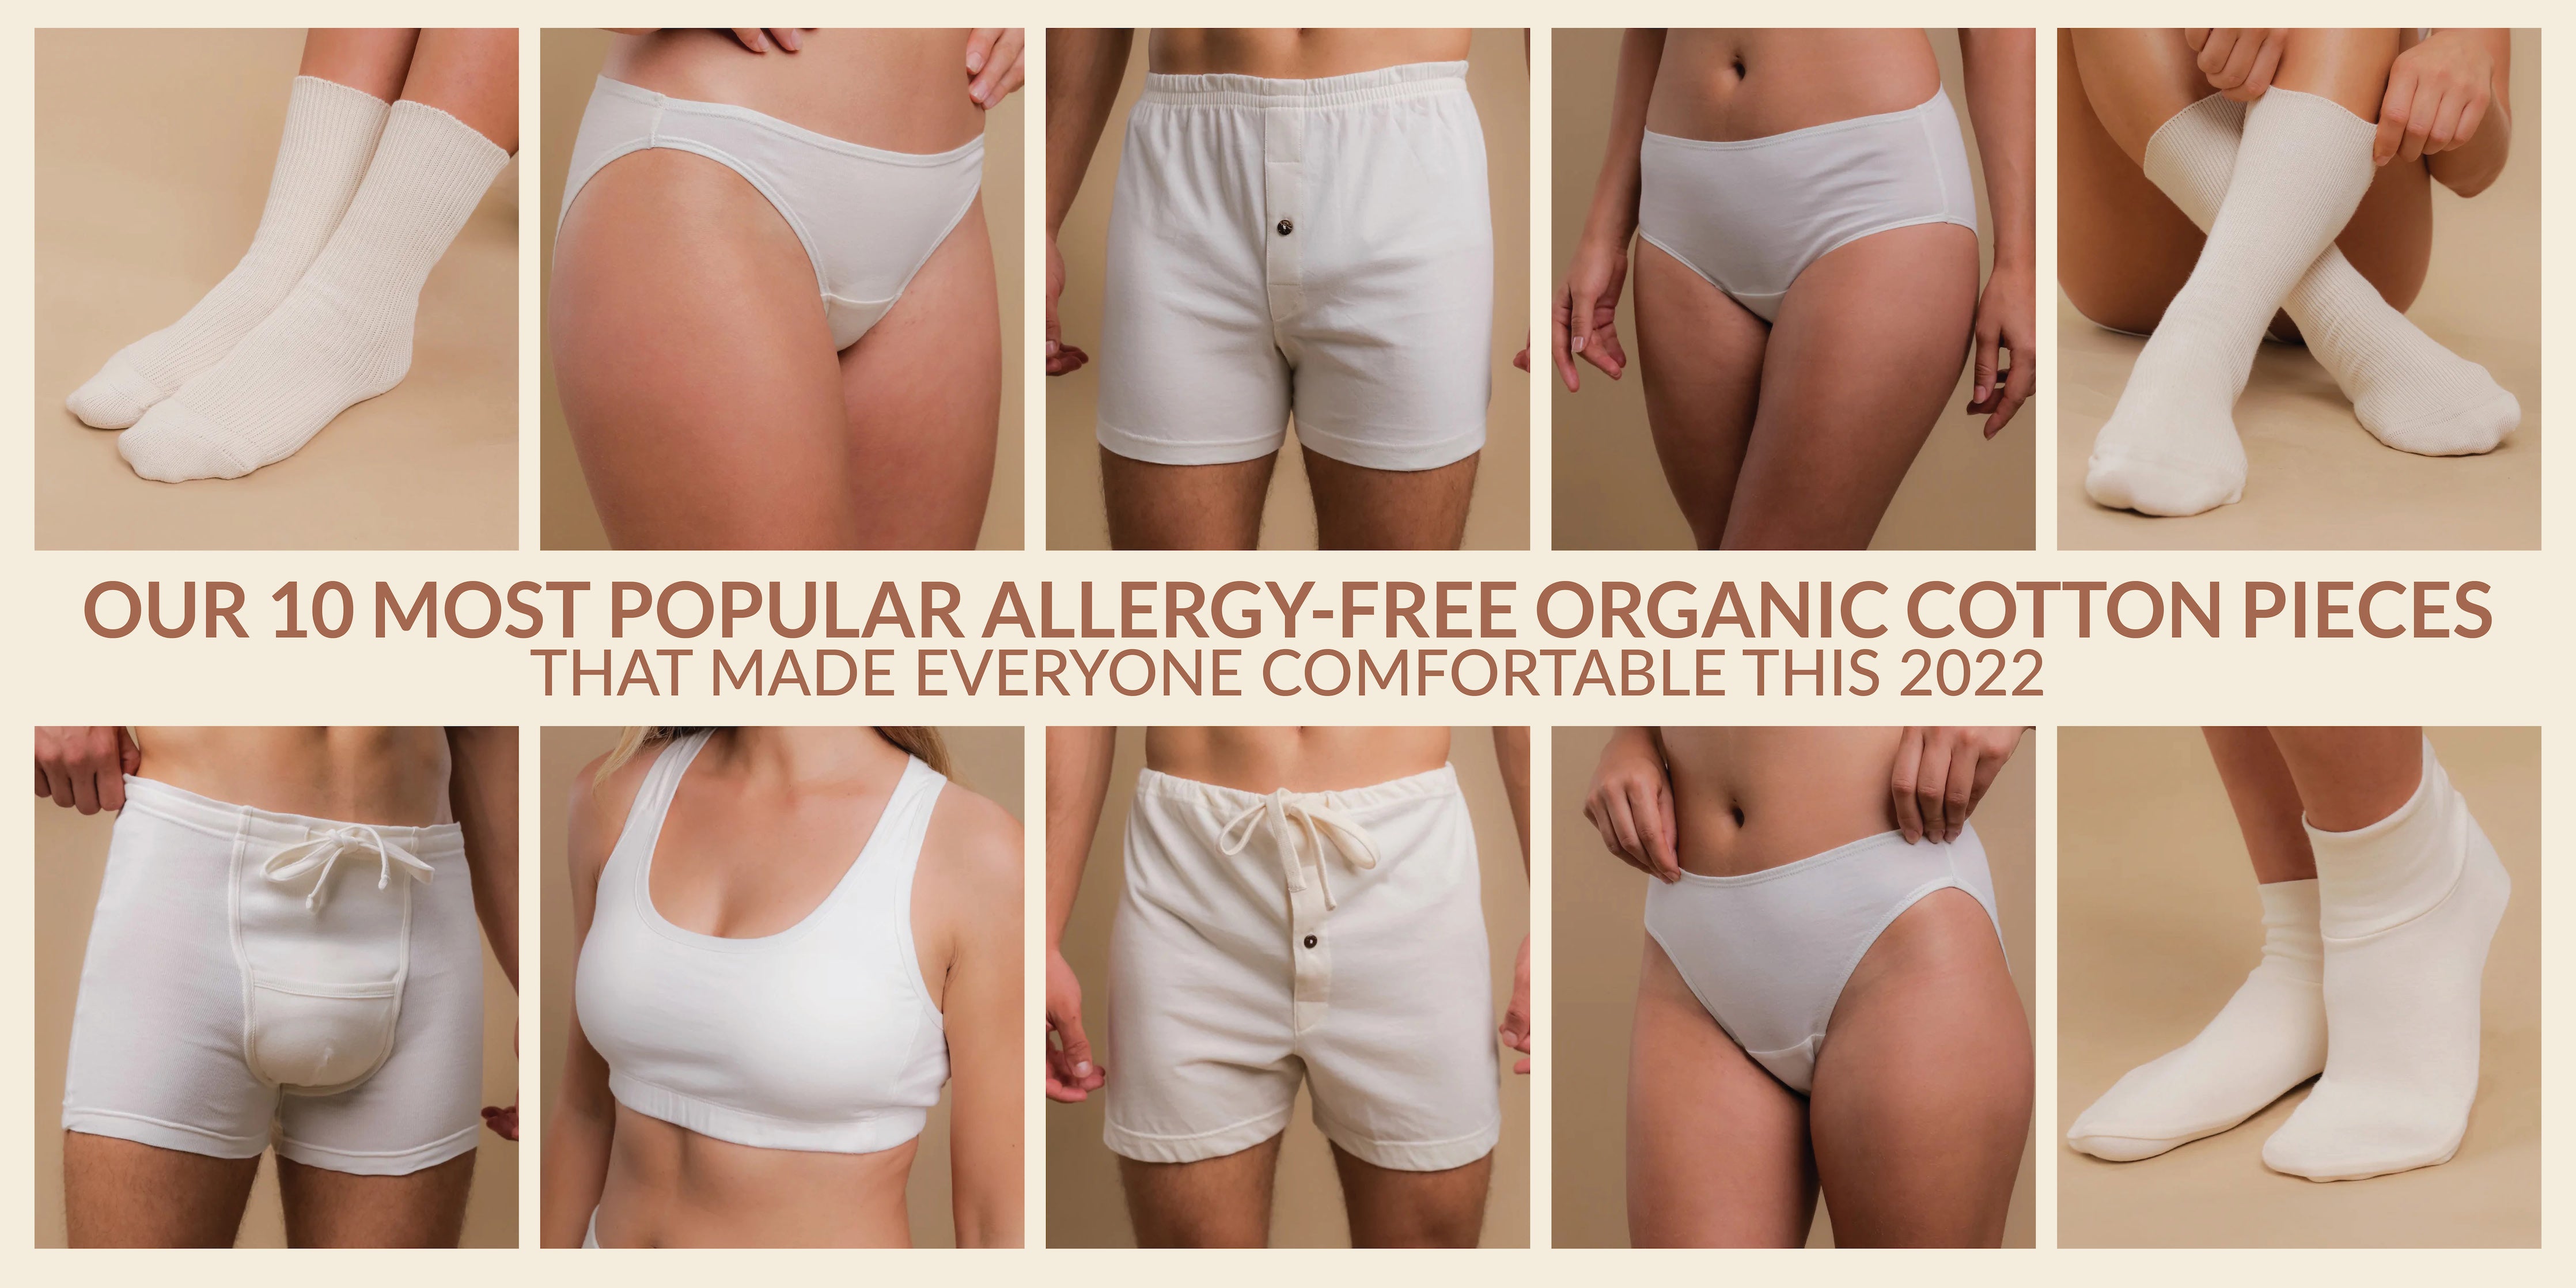 OUR 10 BEST ALLERGY-FREE ORGANIC COTTON PIECES OF 2022 – Cottonique -  Allergy-free Apparel